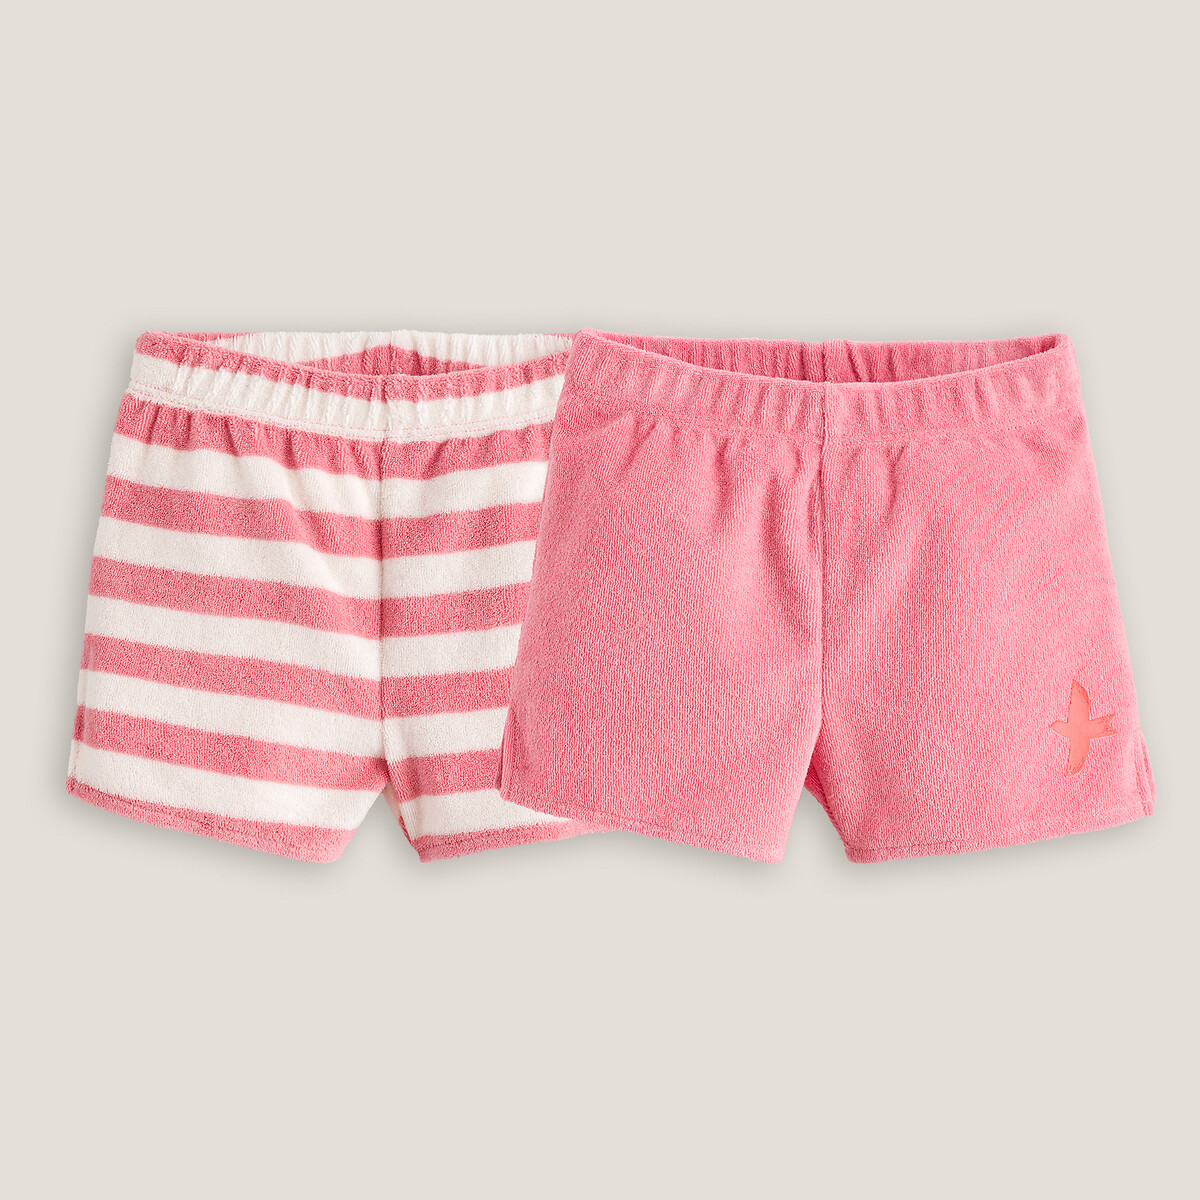 Pack of 2 Shorts in Cotton Mix Towelling